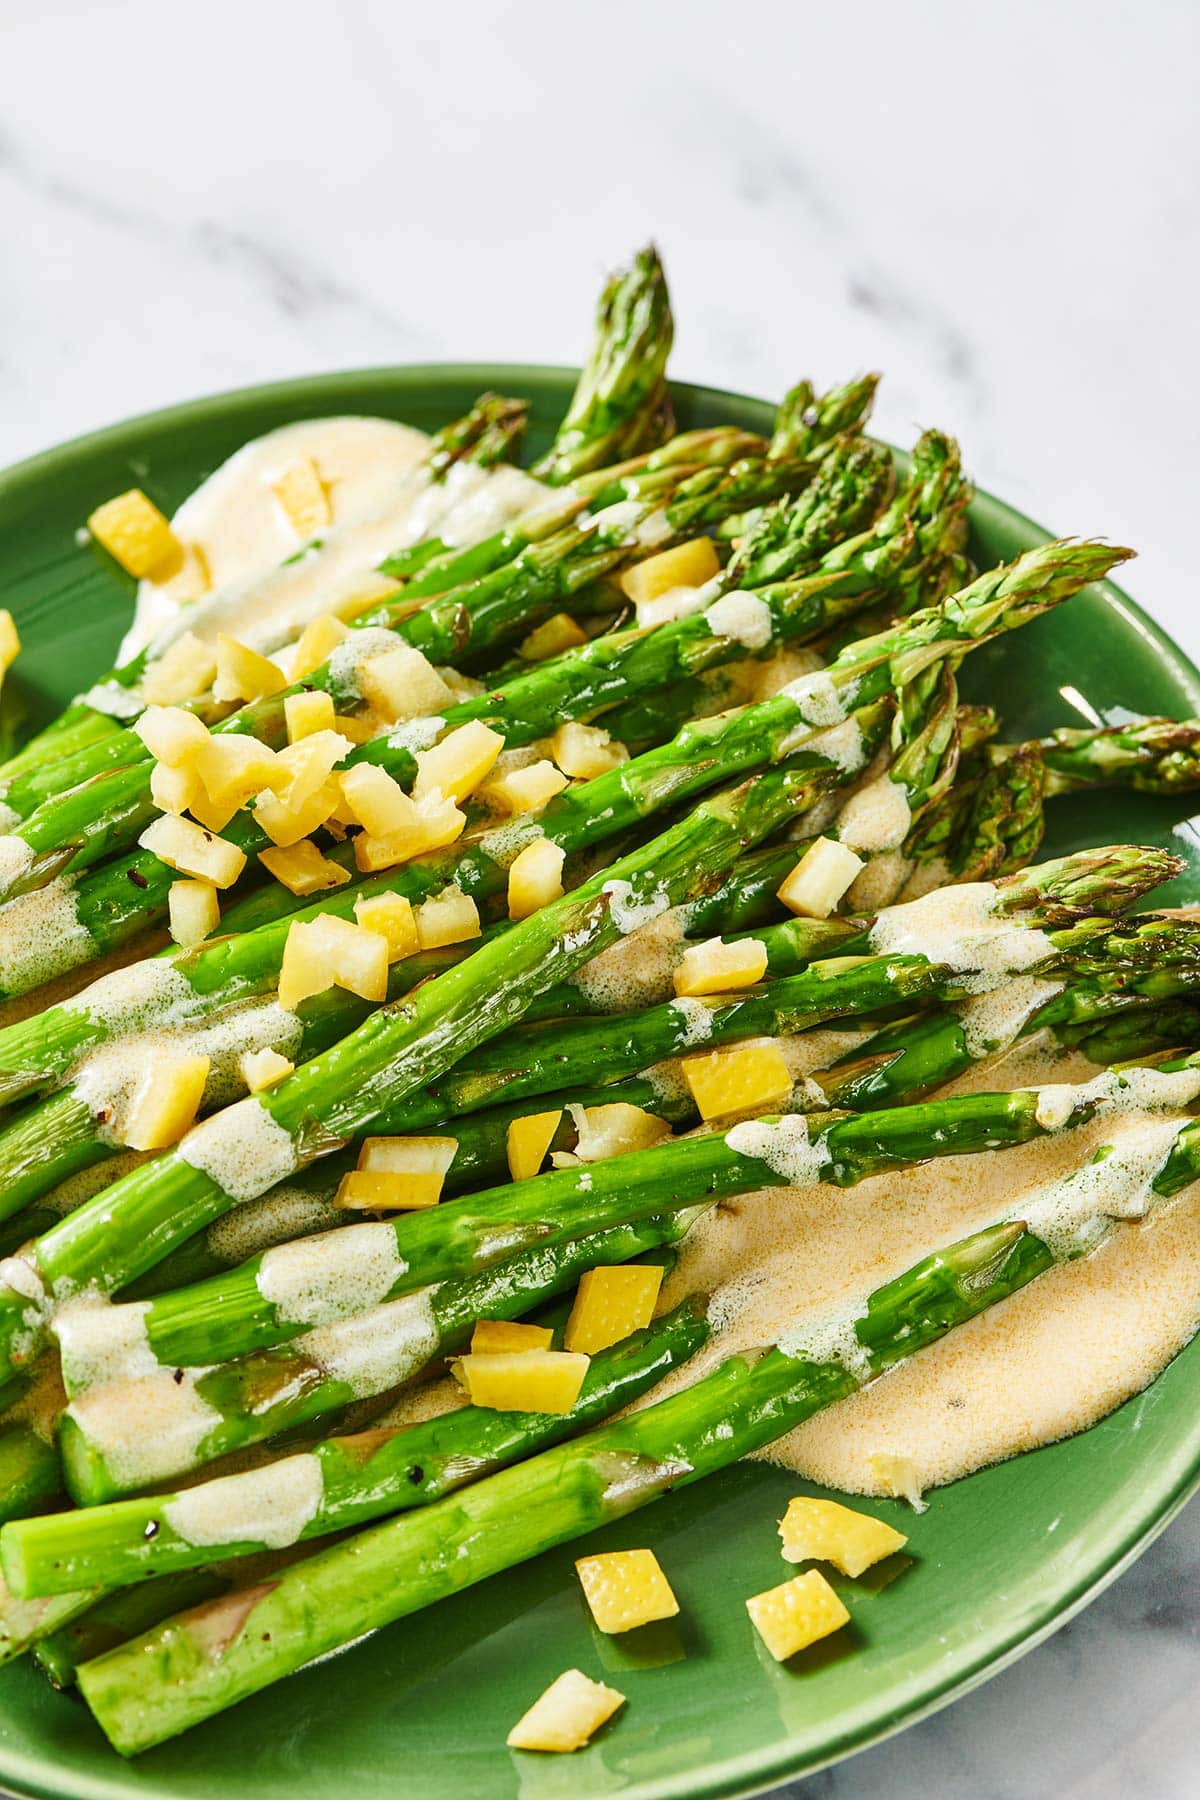 Plate of Roasted Asparagus topped with Creamy Lemon Dressing.